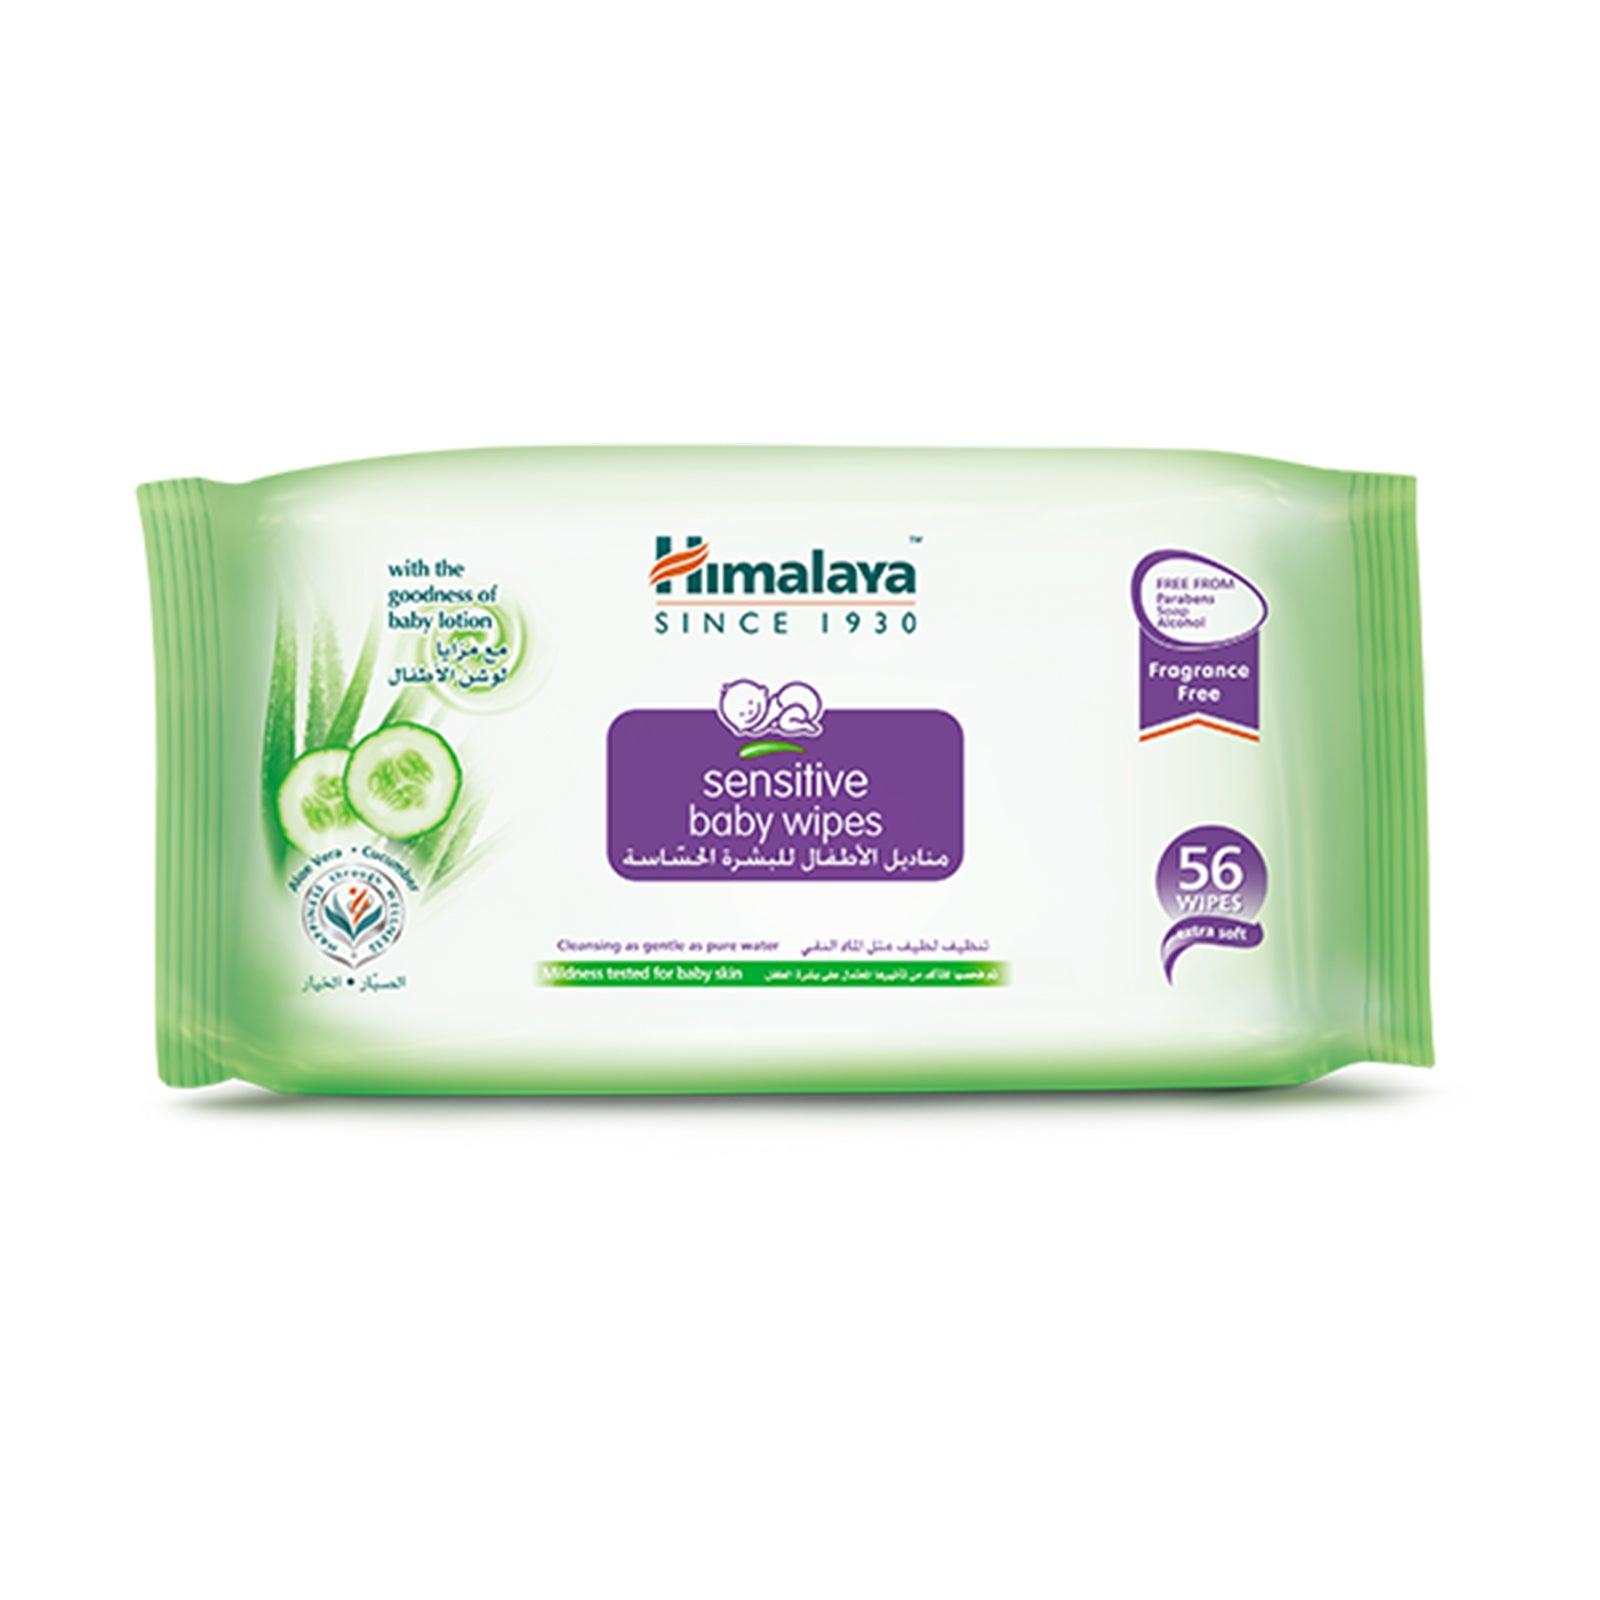 Sensitive Baby Wipes Pack of 56 Sheets